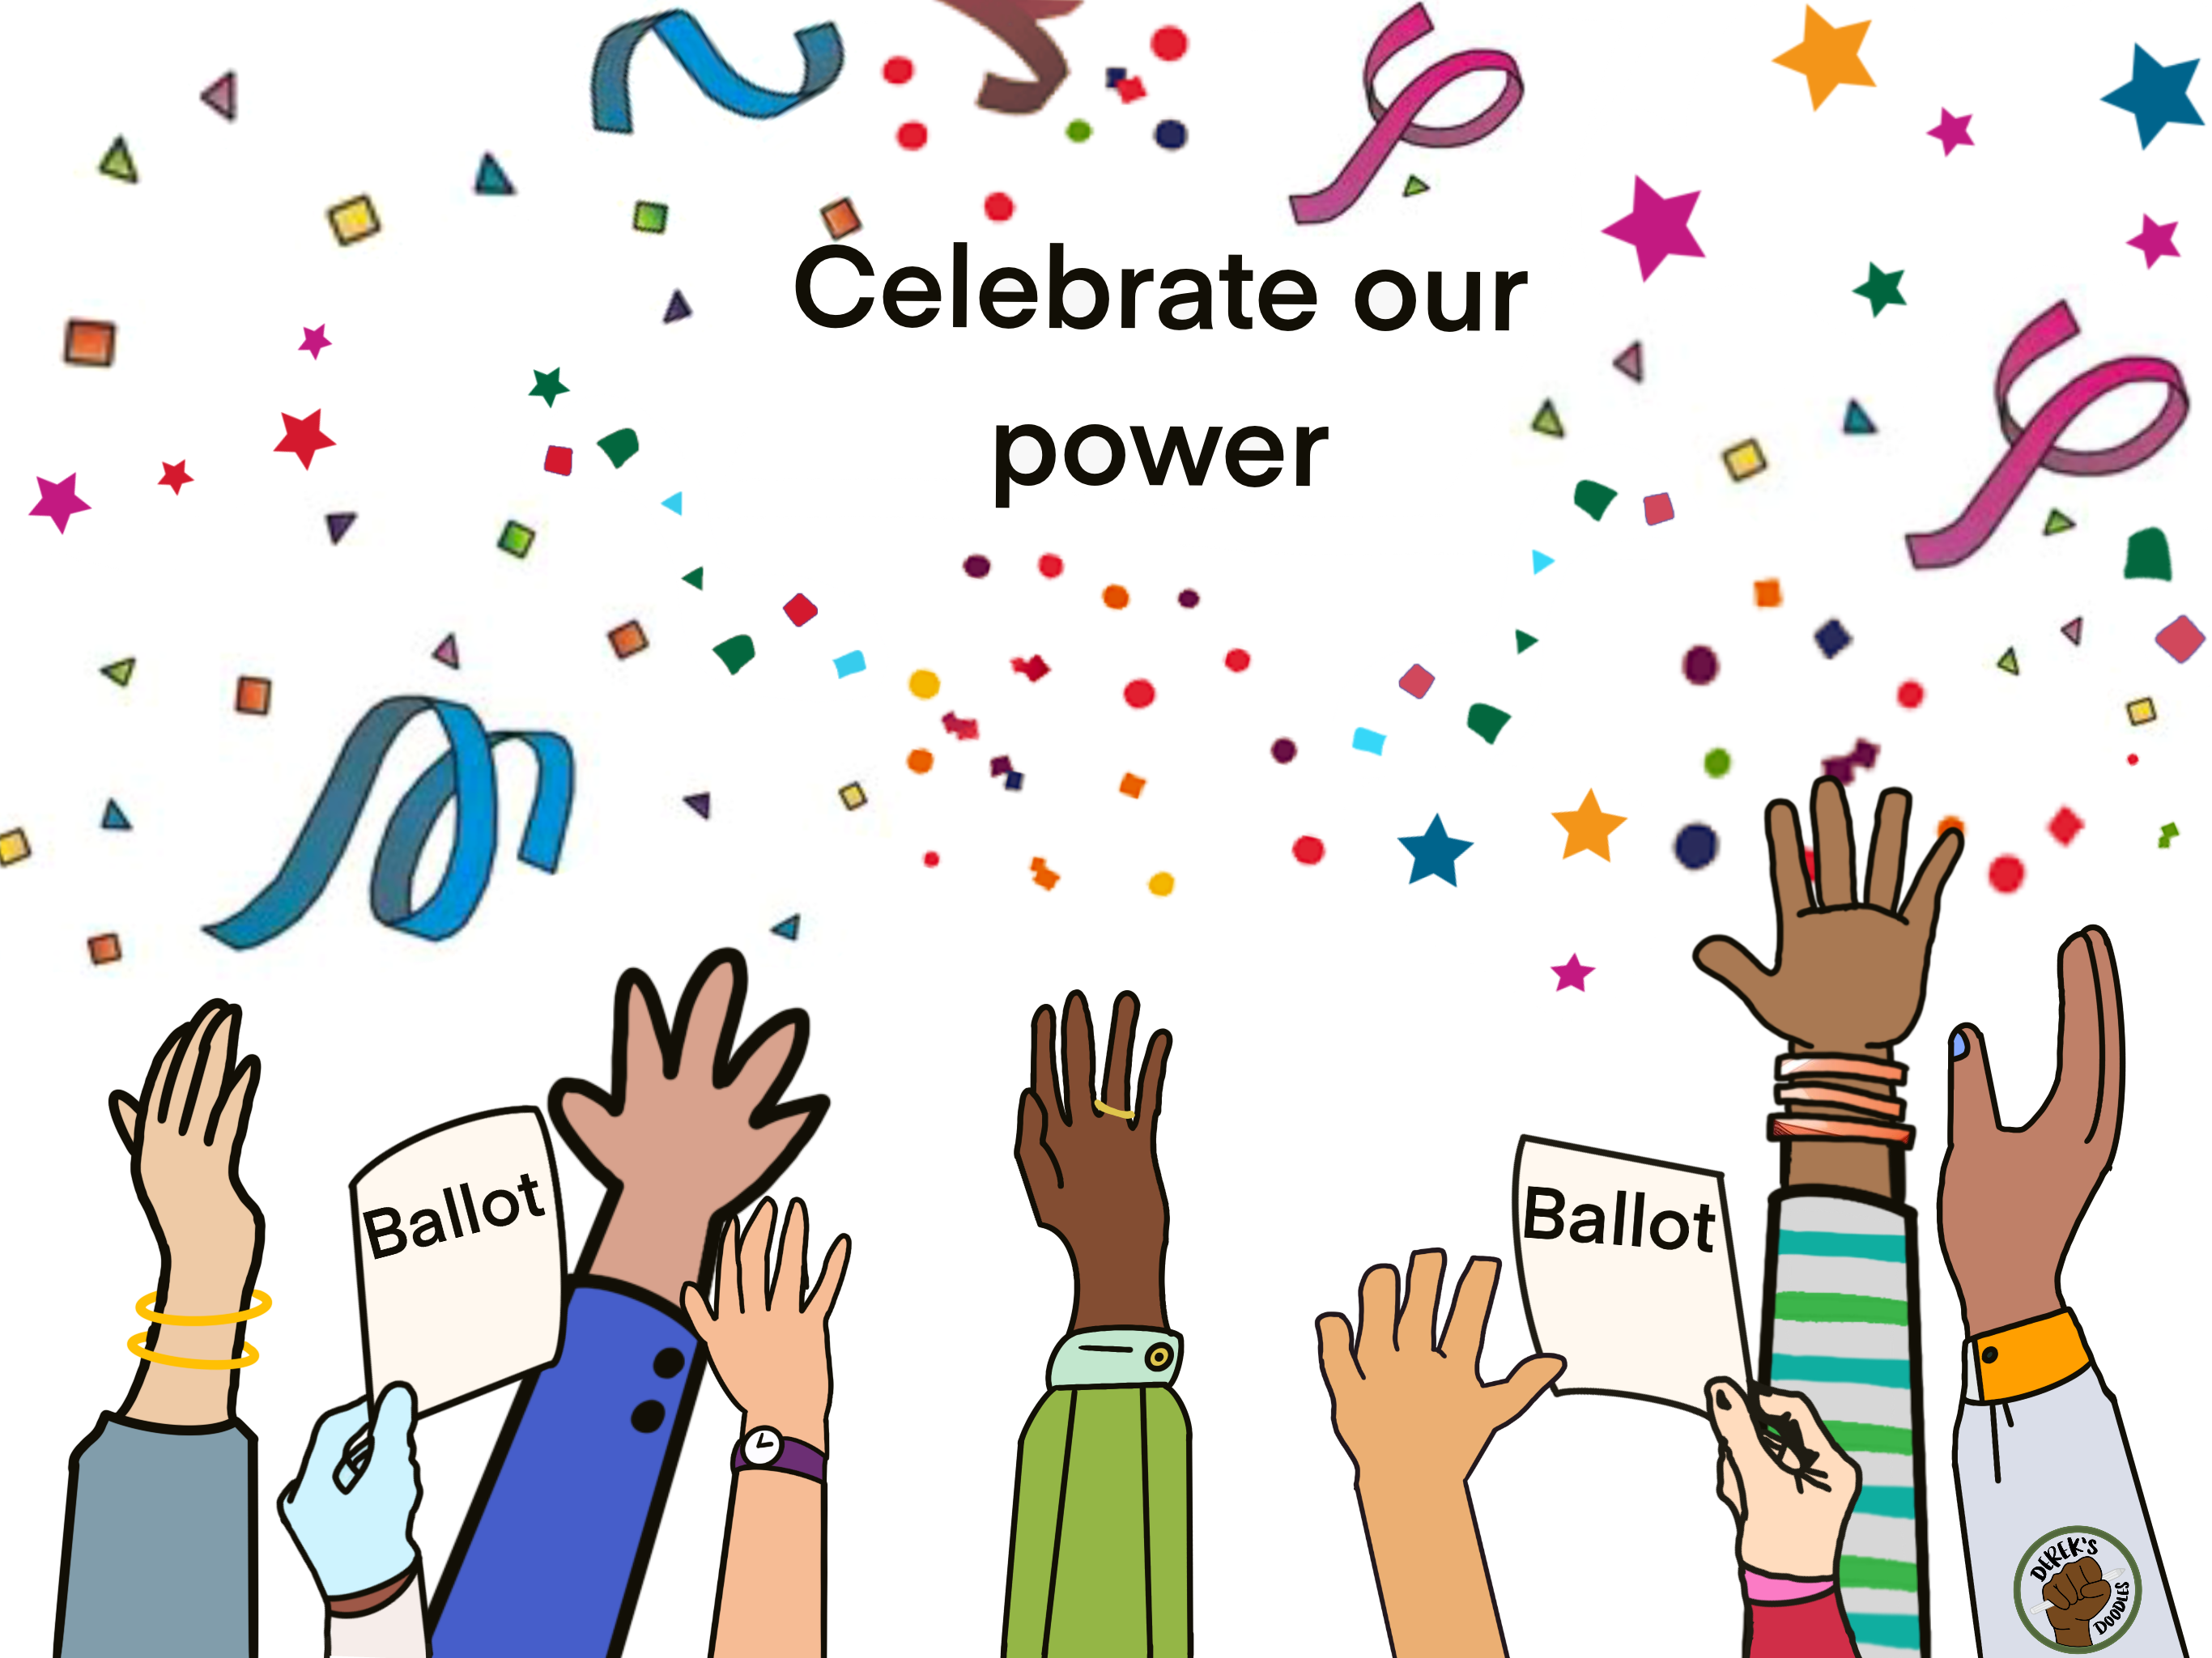 Hands of all different skin tones are raised, some of the hands hold up ballots. There is colorful confetti and ribbons all around the hands. The graphic says, “Celebrate our power.” In the bottom right corner is the logo for Derek’s Doodles.